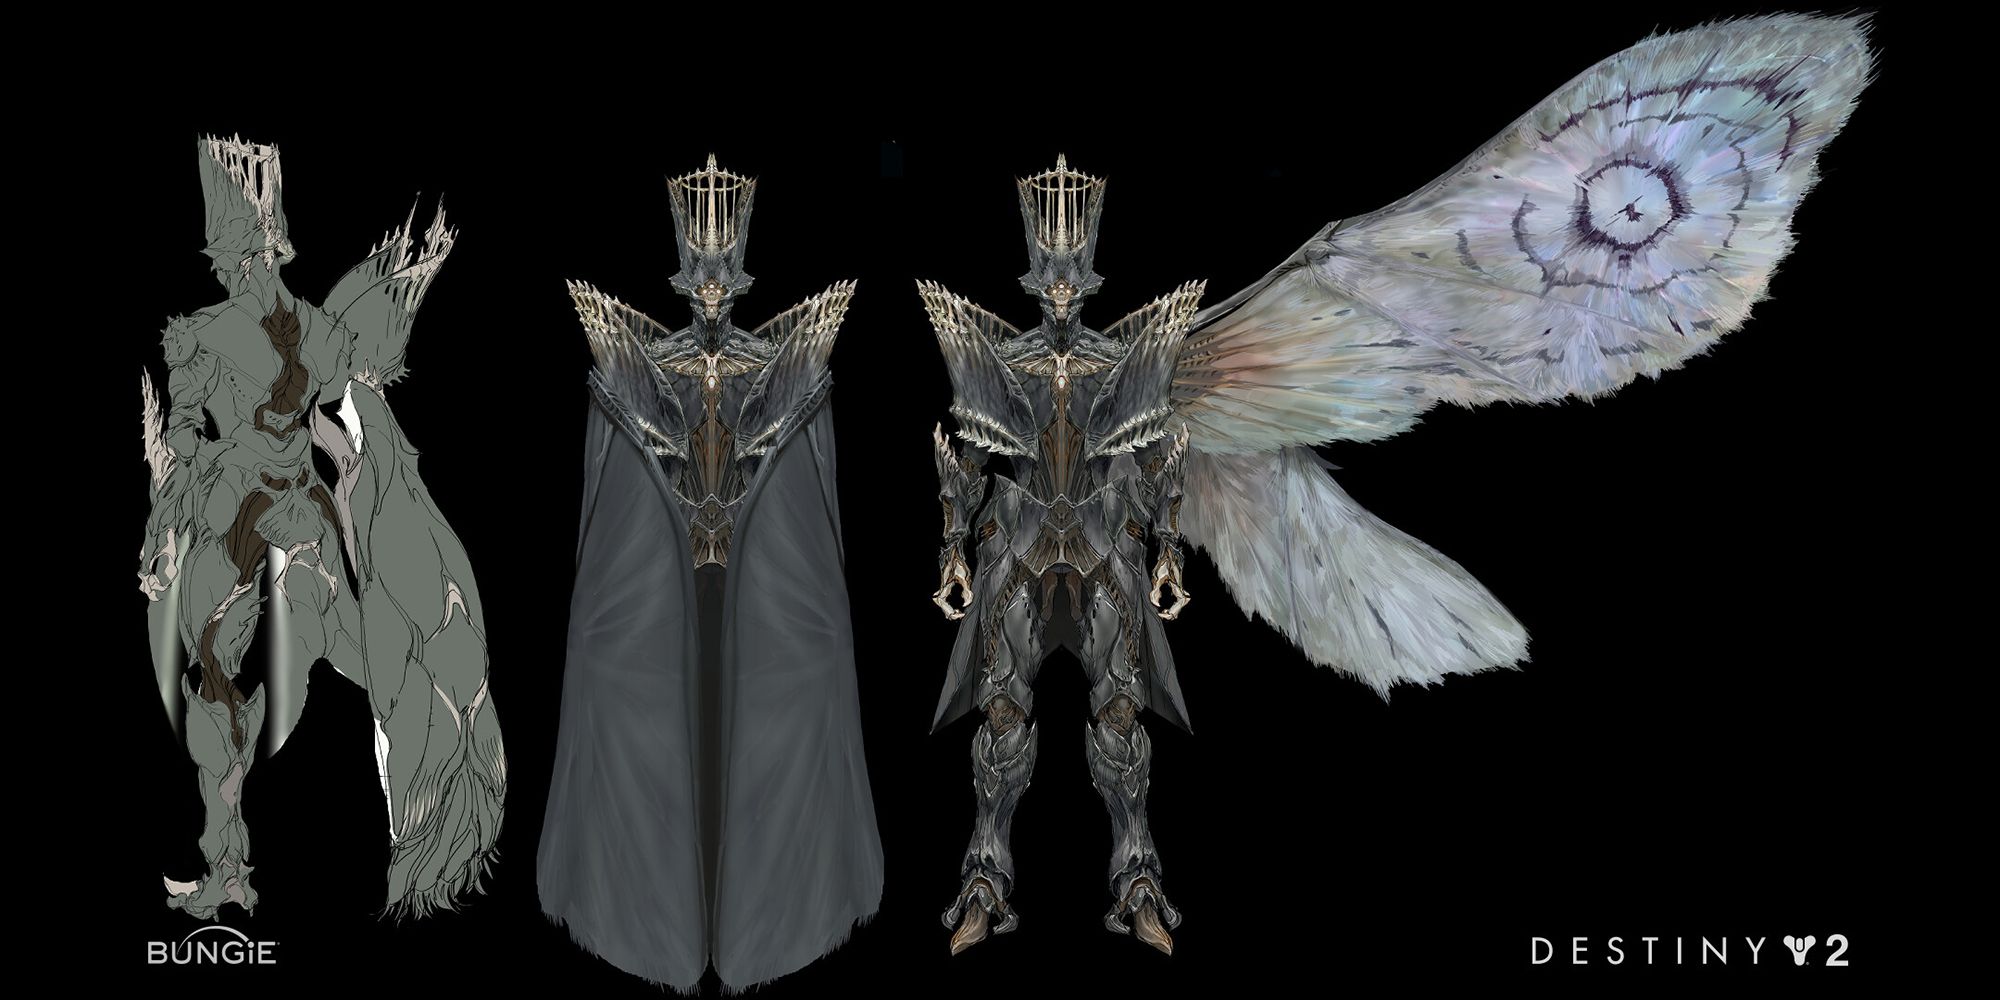 Savathun's design inspired by early concepts of the "Moth People"